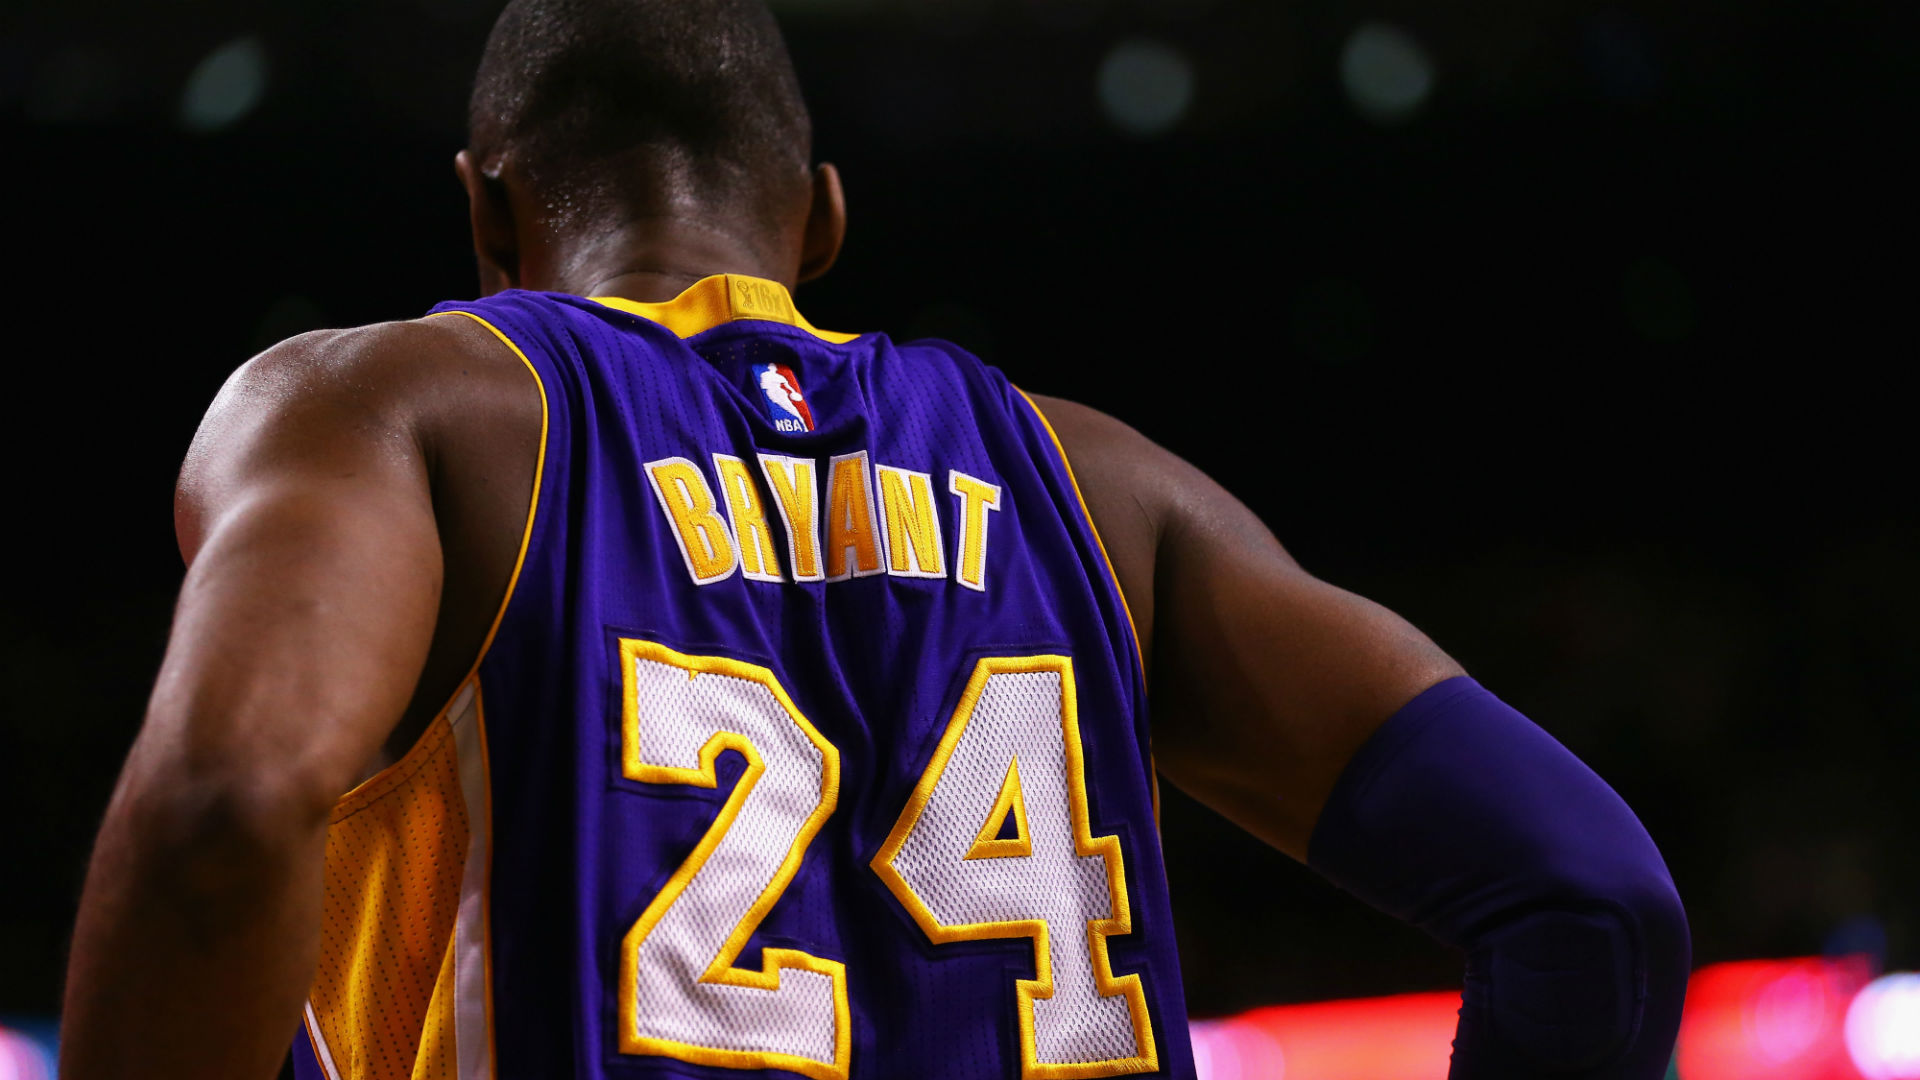 Kobe Bryant becomes third player to score 33,000 points | Sporting News